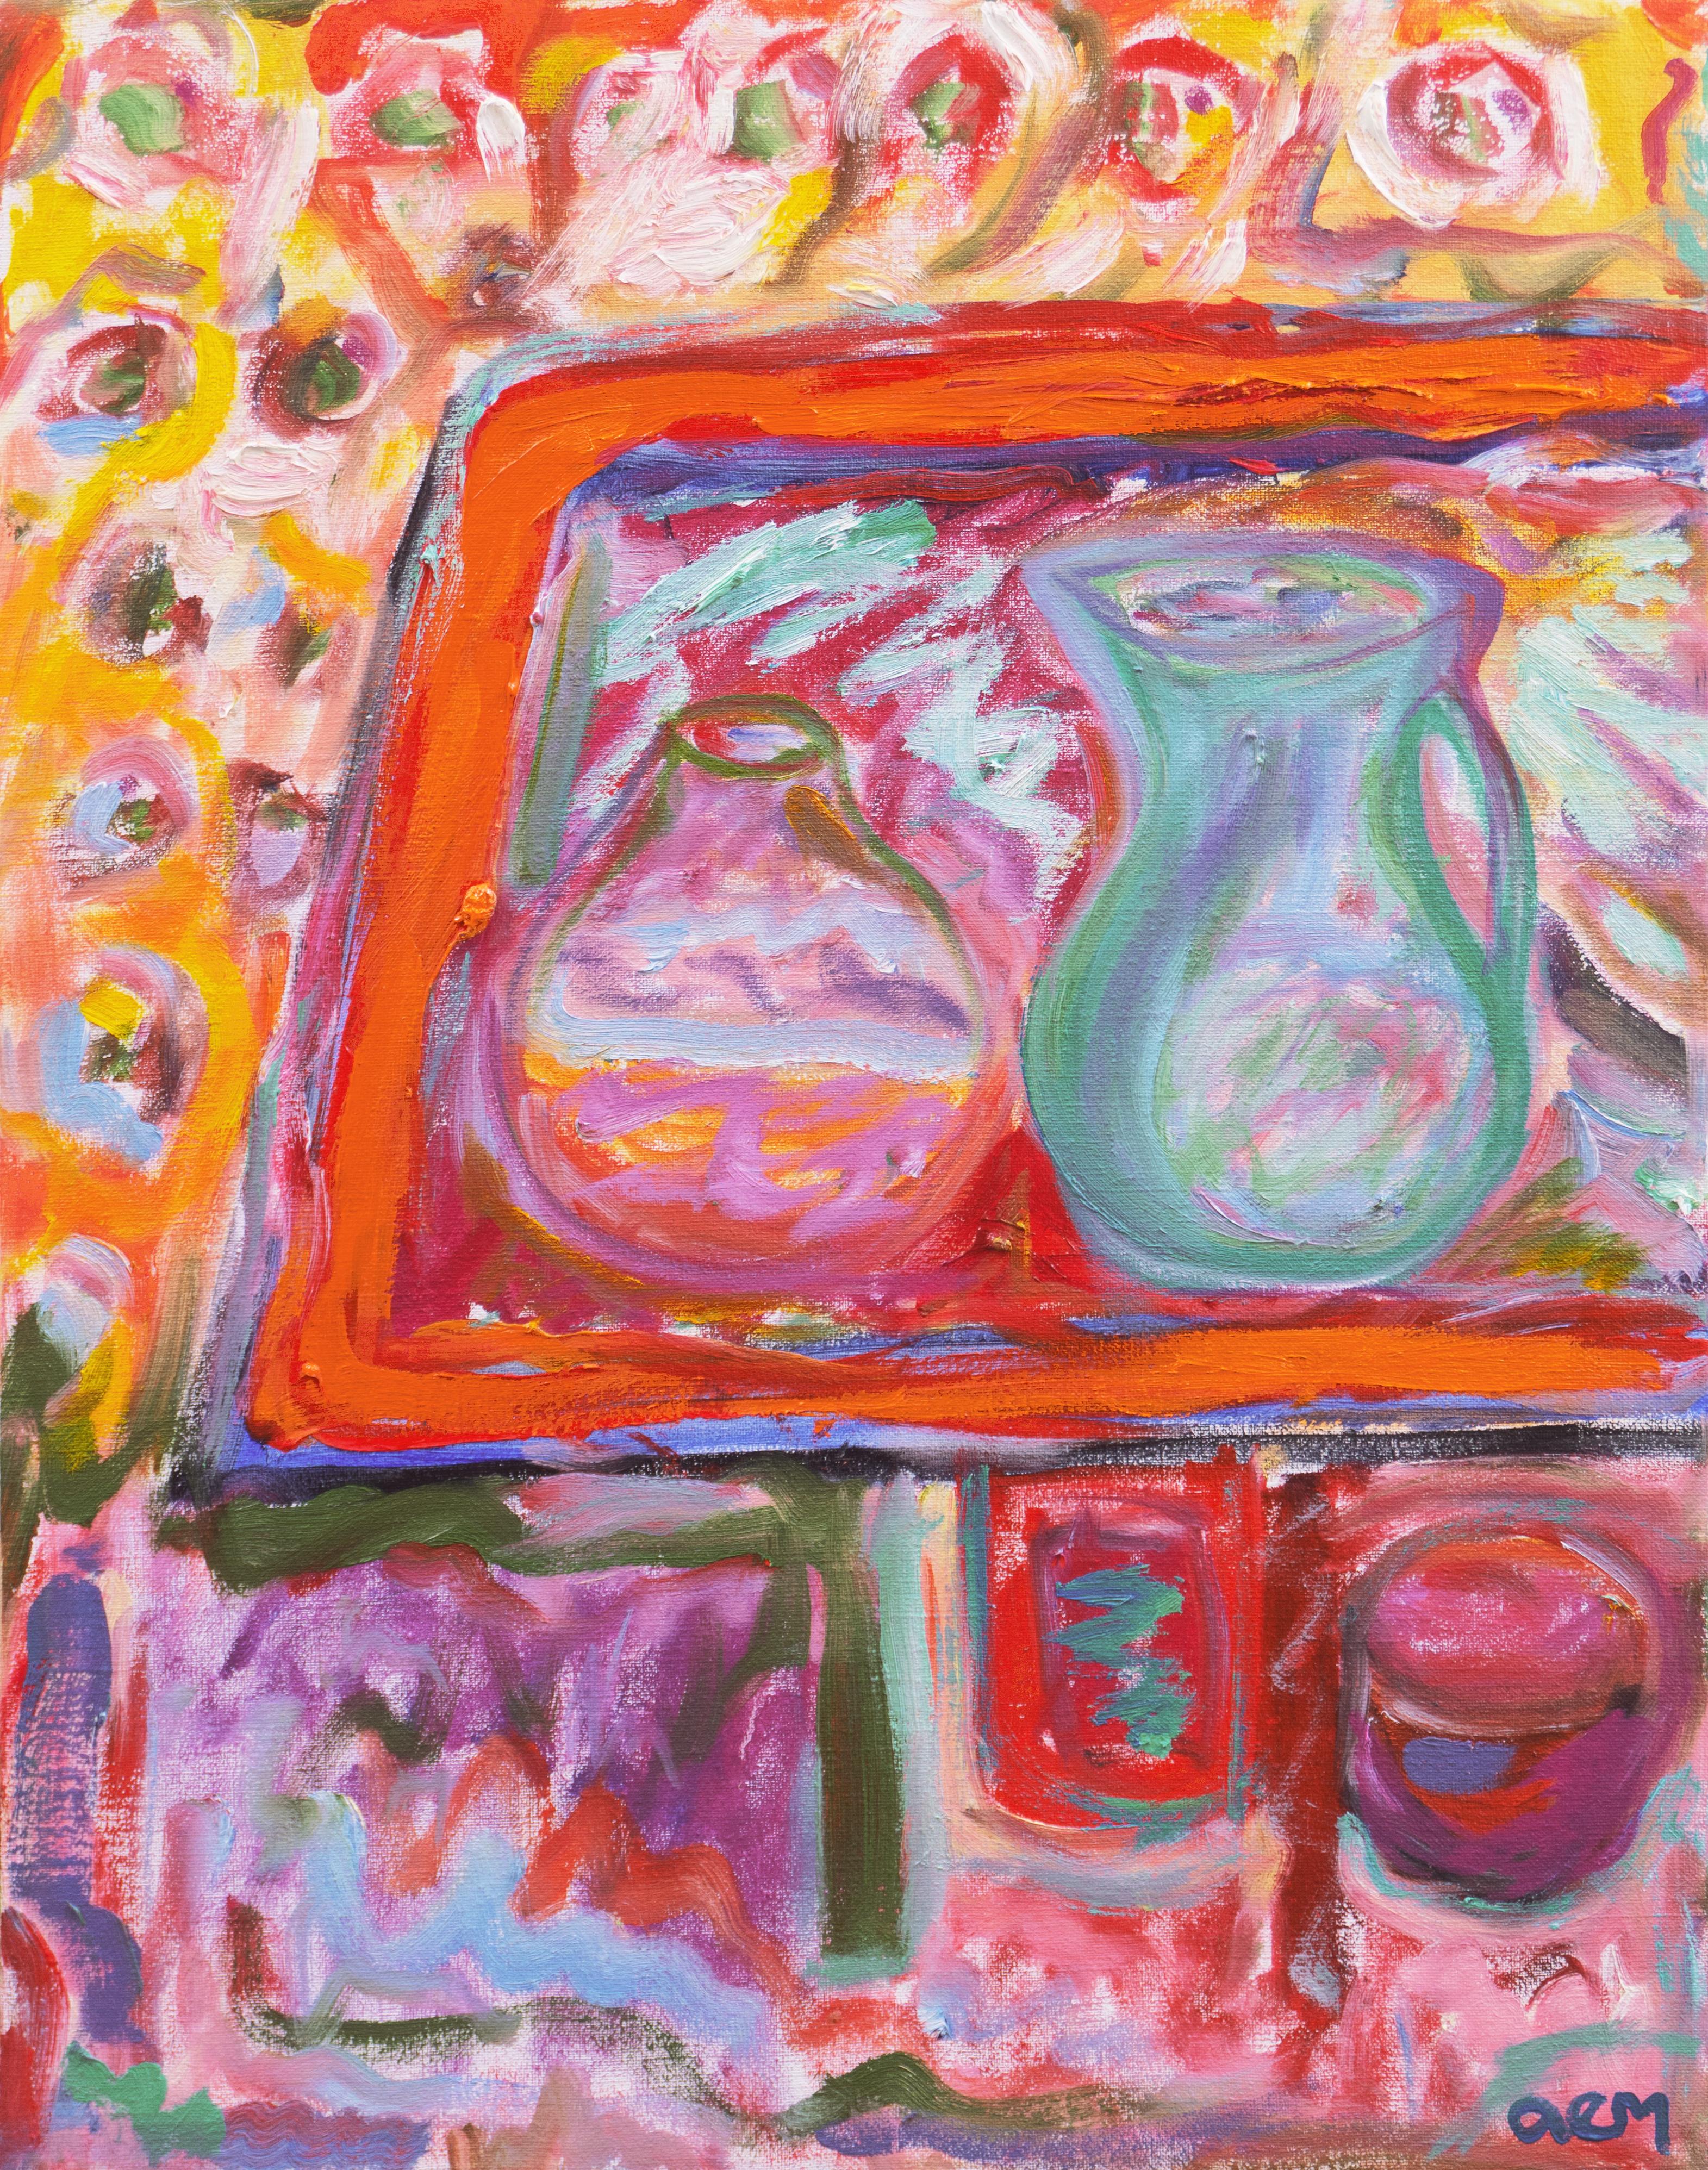 'Still Life with Blue Jug', Contemporary California Expressionist artist